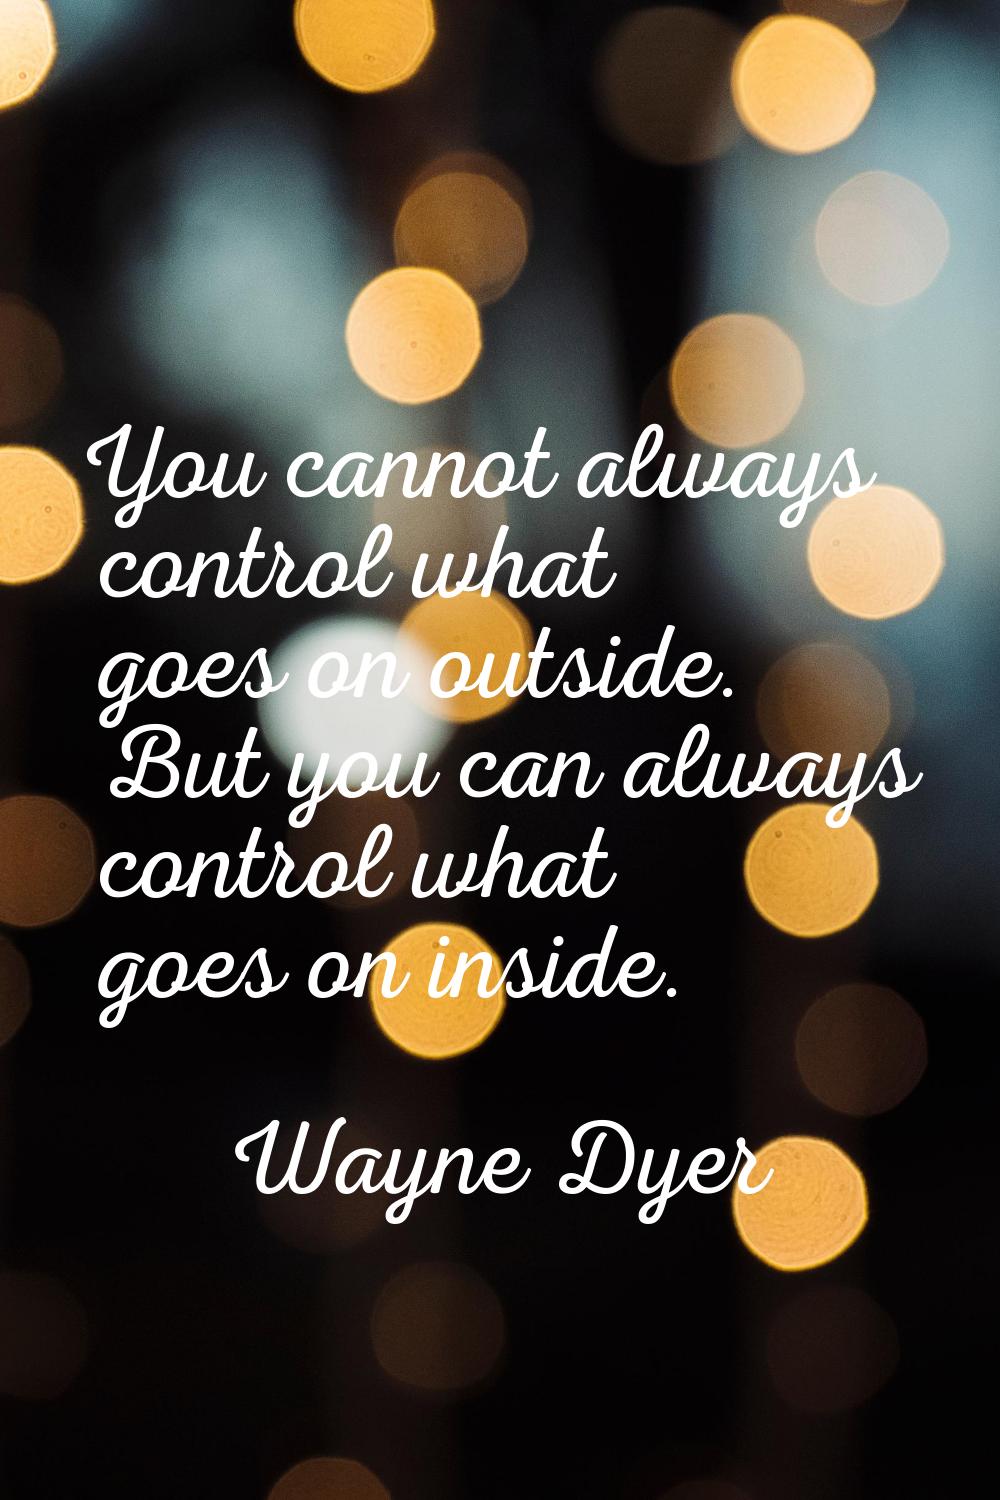 You cannot always control what goes on outside. But you can always control what goes on inside.